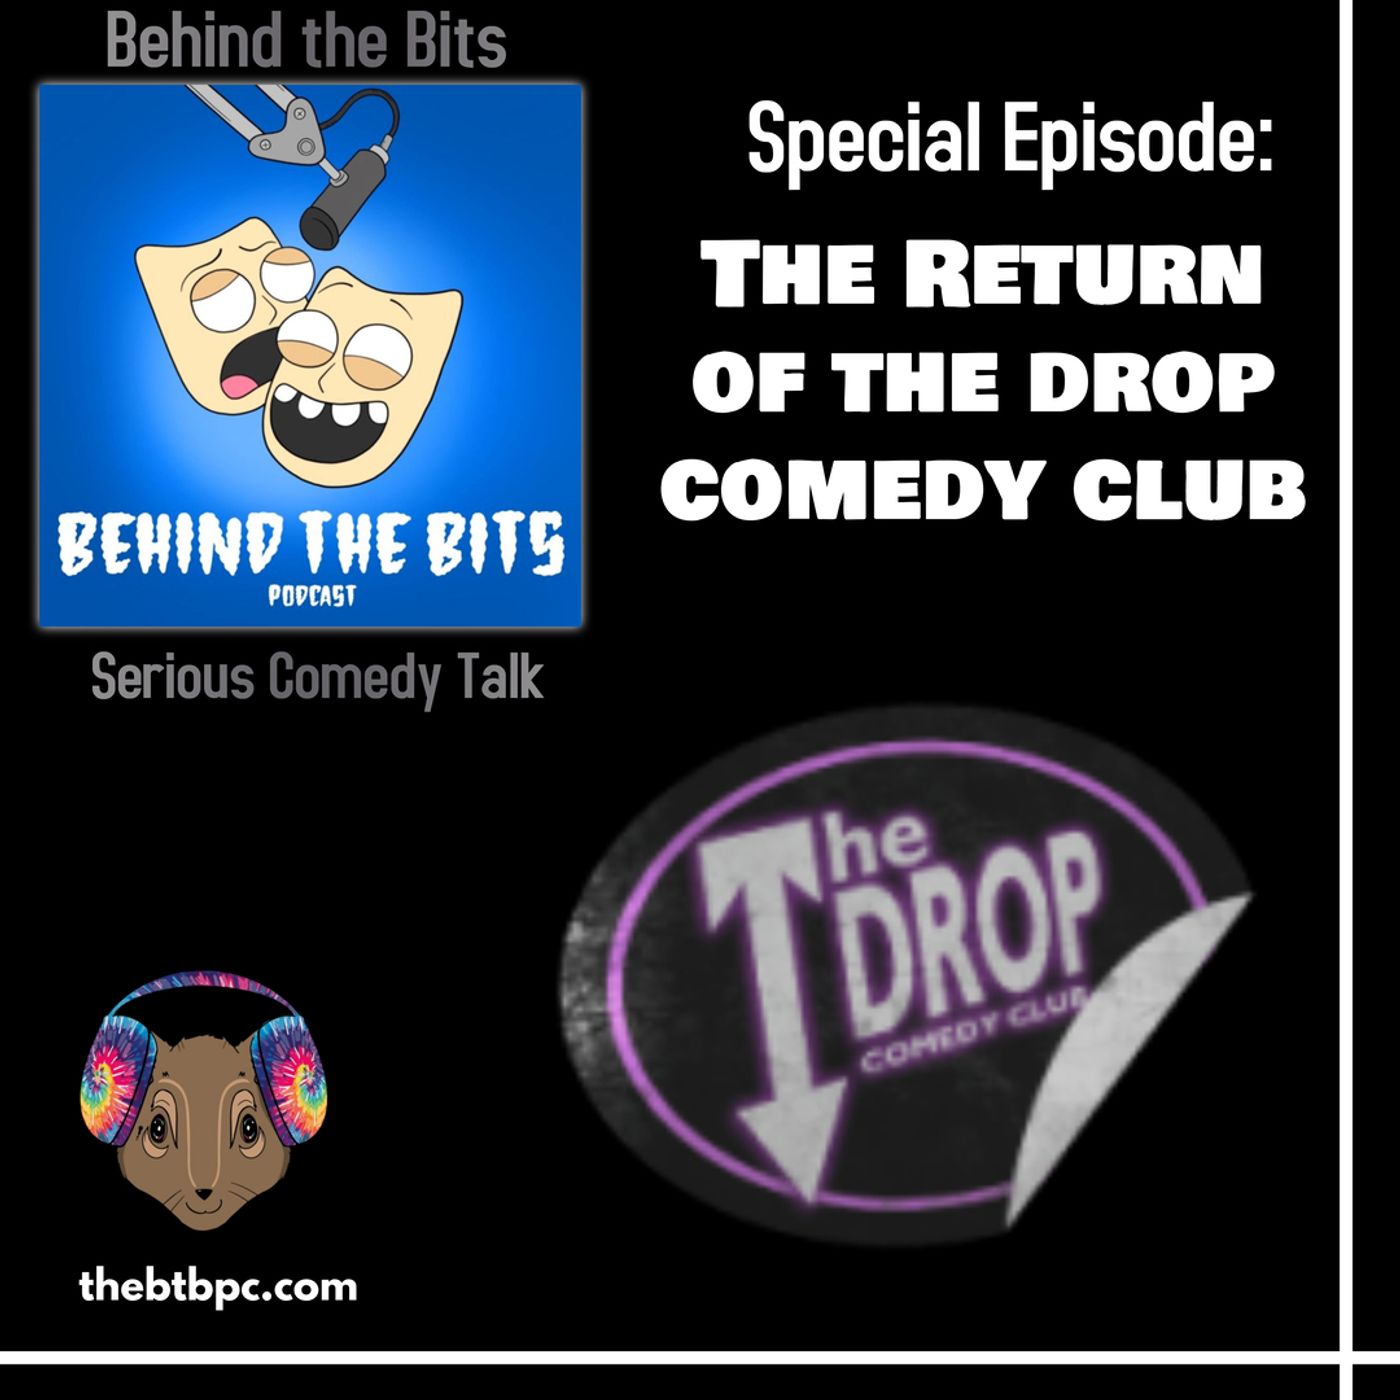 Special Episode: Return of the Drop Comedy Club